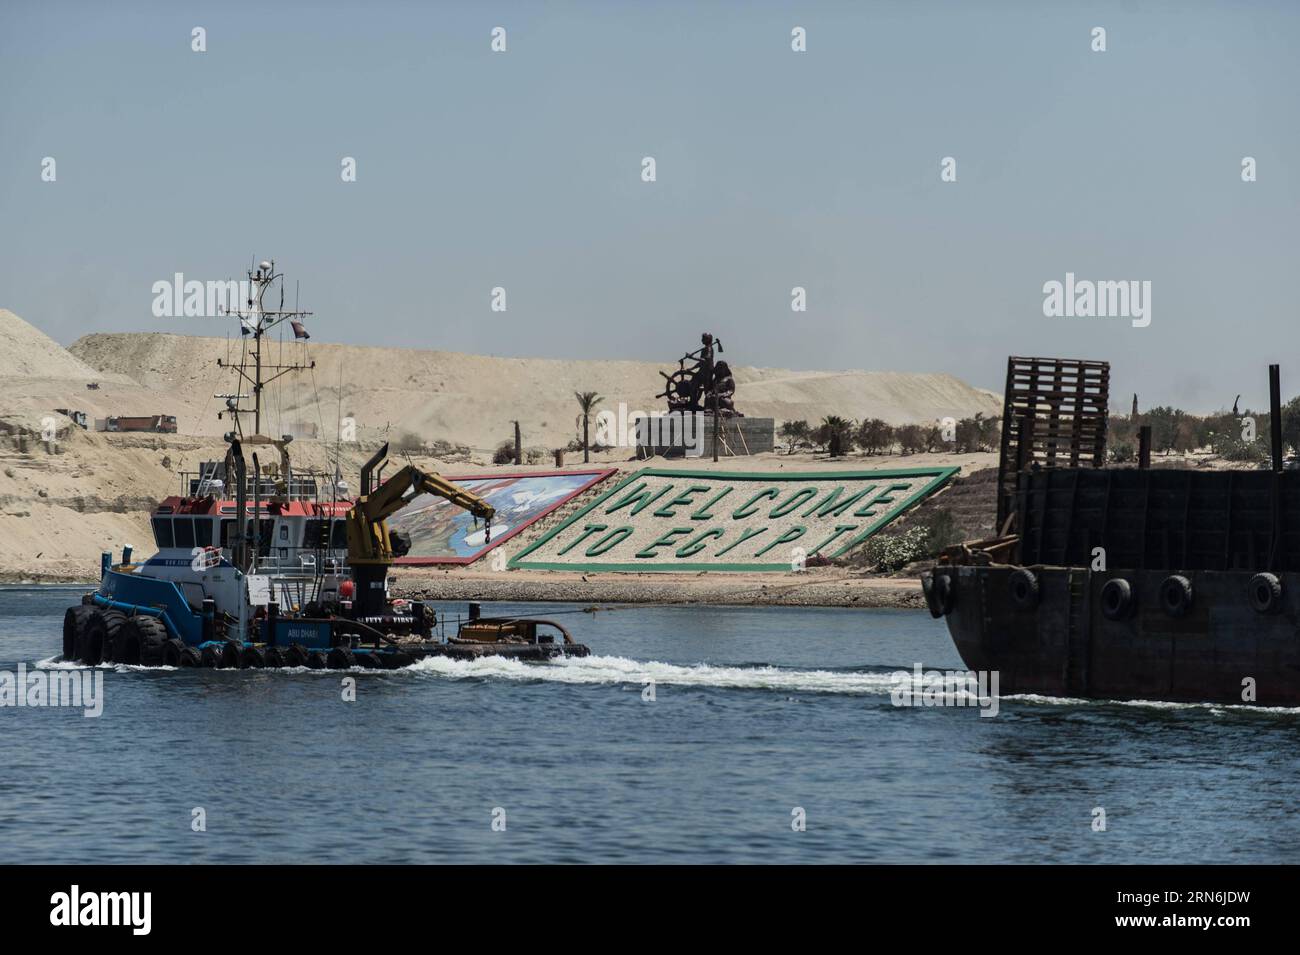 WIRTSCHAFT Ägypten: Neuer Suezkanal fertig gestellt (150729) -- ISMAILIA, July 29, 2015 -- Boats cross through the new Suez Canal in Ismailia, a port city in Egypt, on July 29, 2015. The dredging work of Egypt s New Suez Canal has been completed and the waterway is ready as well as safe for huge ship navigation, Mohab Memish, head of the Suez Canal Authority (SCA), told reporters in a press conference Wednesday. ) EGYPT-ISMAILIA-NEW SUEZ CANAL PanxChaoyue PUBLICATIONxNOTxINxCHN   Economy Egypt later Suez Canal ready asked 150729 Ismailia July 29 2015 Boats Cross Through The New Suez Canal in I Stock Photo